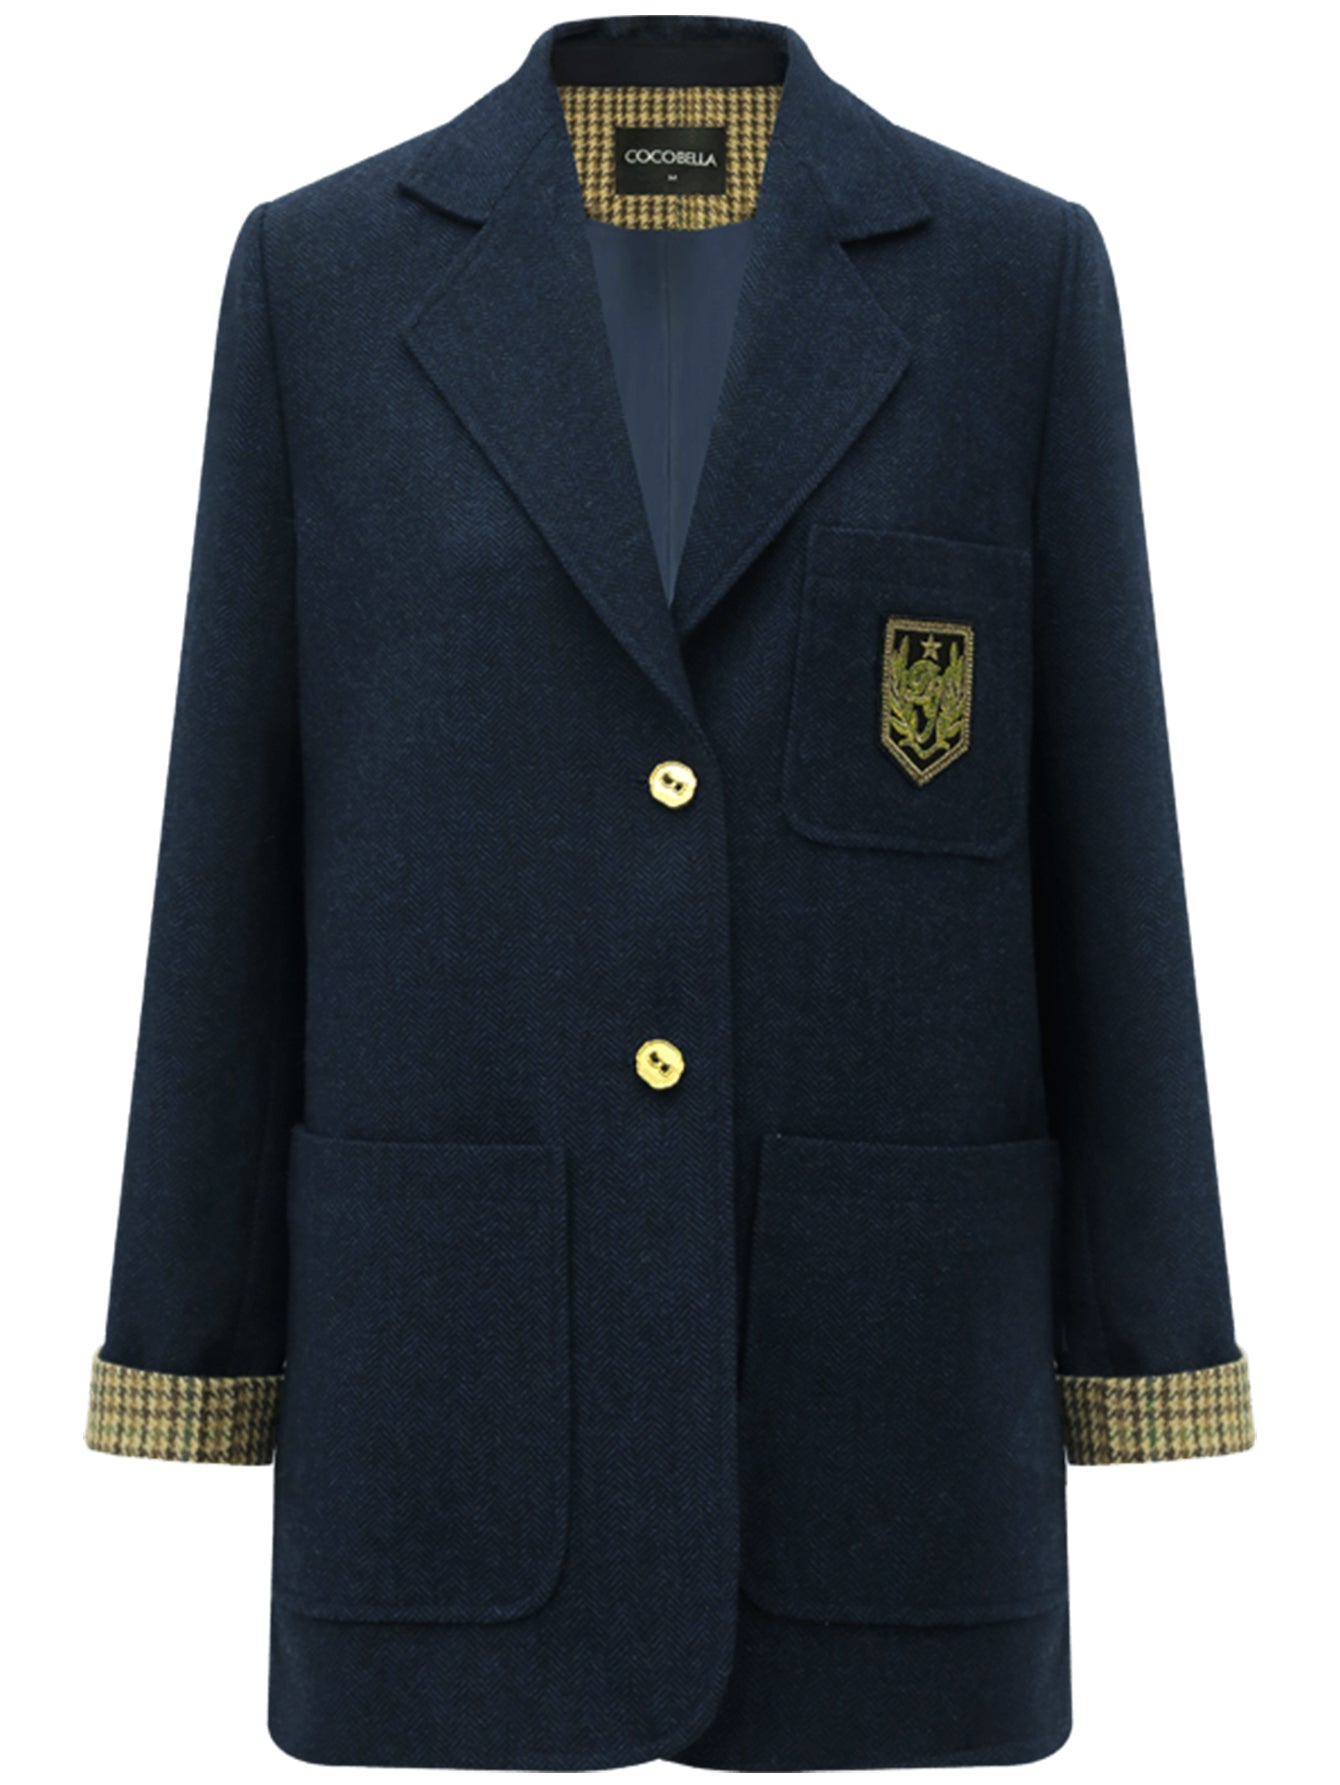 navy-double-button-british-style-college-coat_all_navy_4.jpg